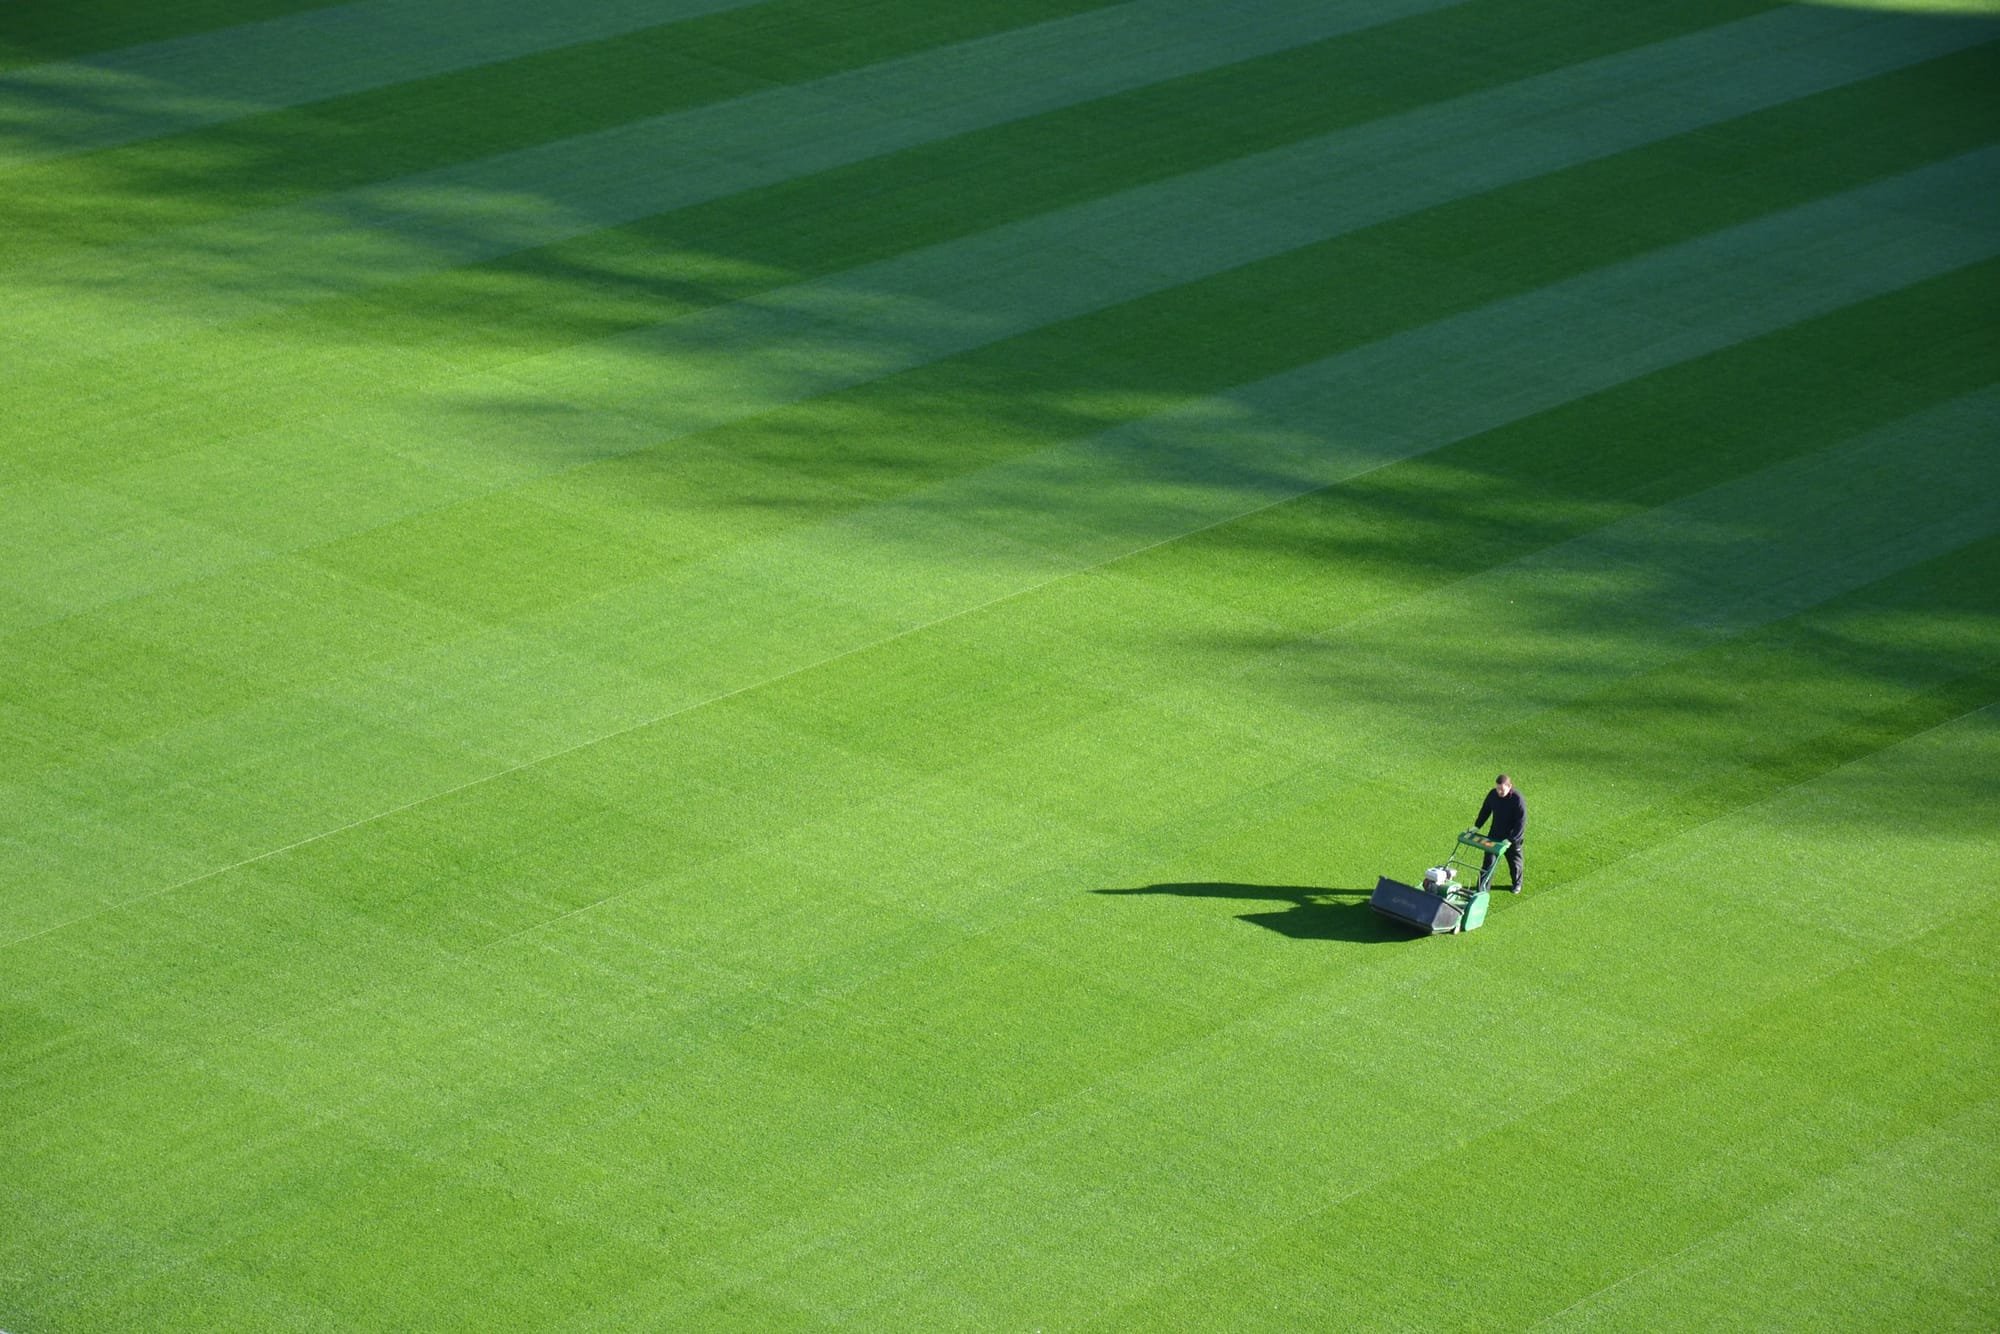 6 Things You Should Look For In A Good Lawn Care Business